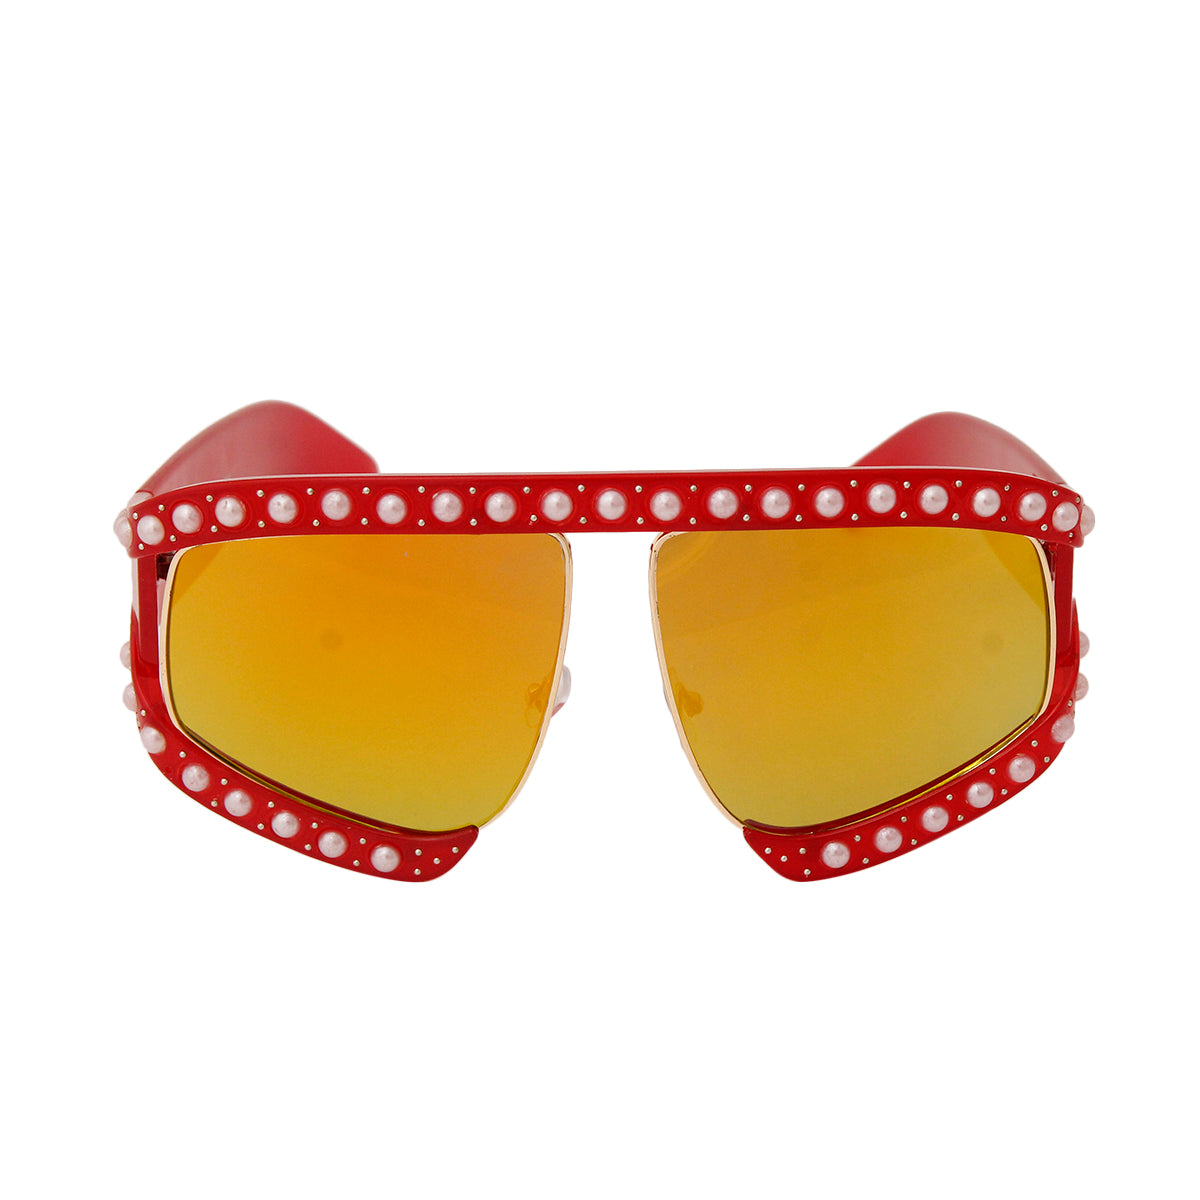 Red and Pearl Sunglasses